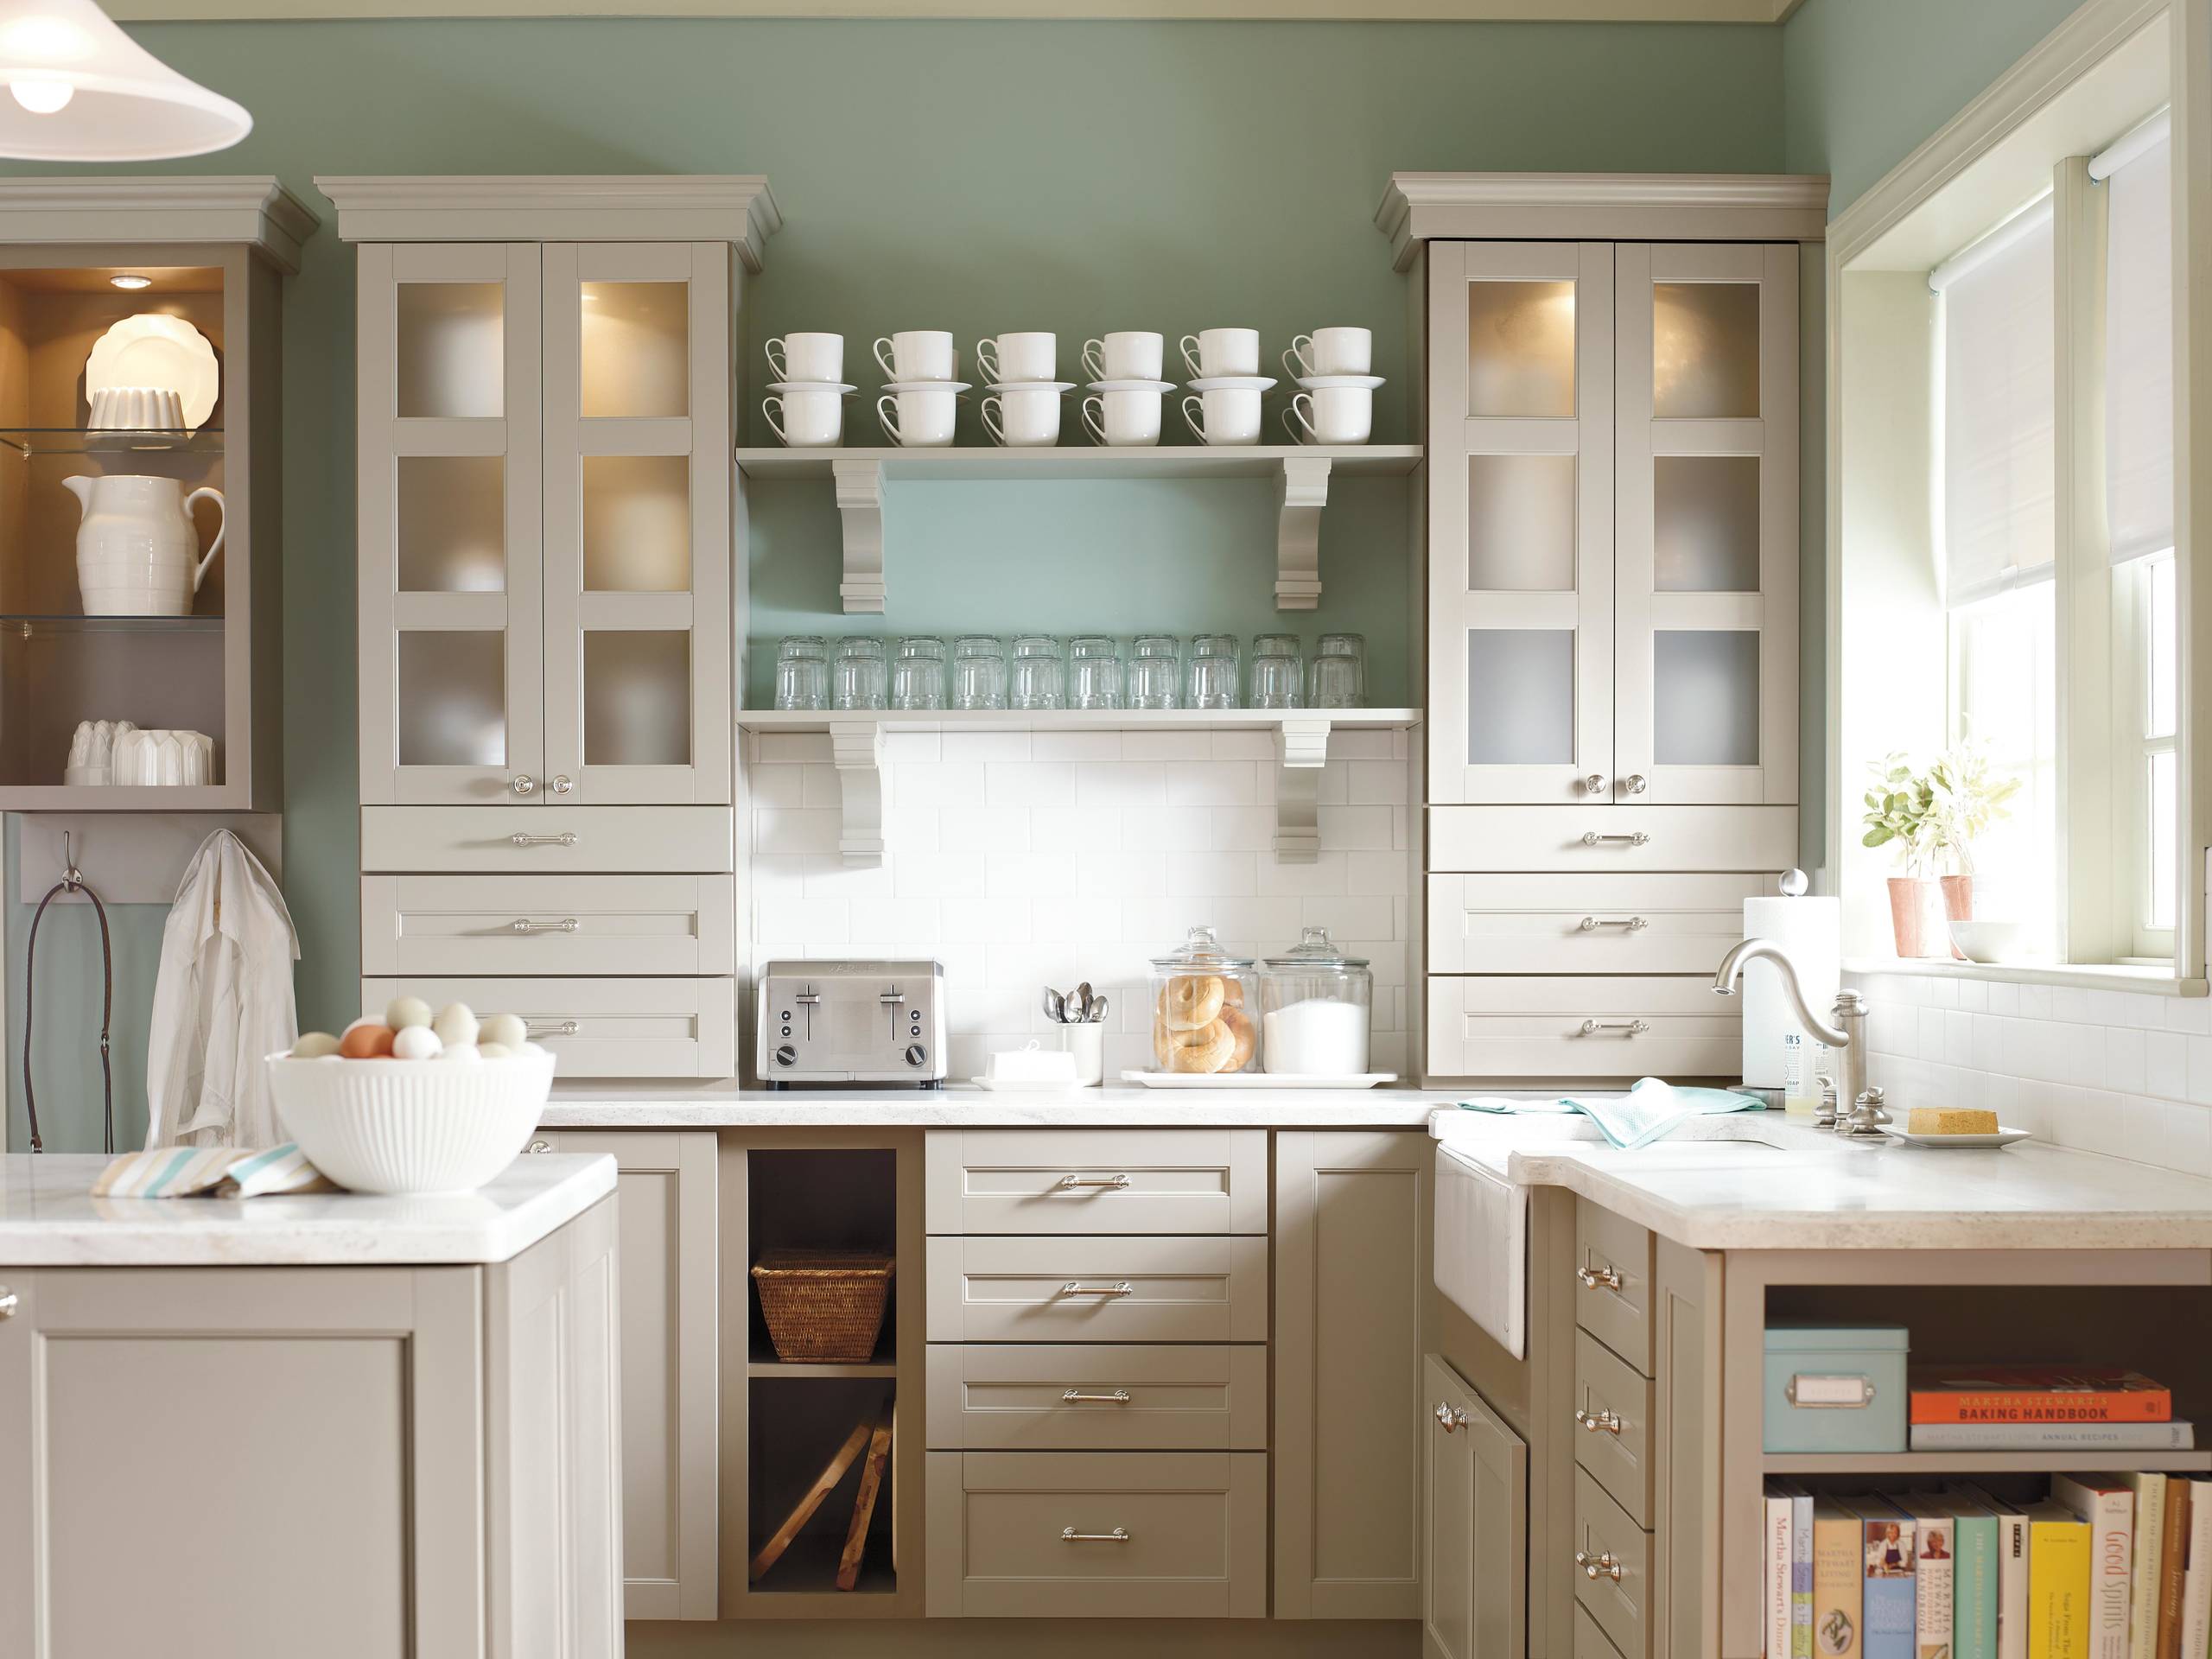 https://st.hzcdn.com/simgs/pictures/kitchens/country-kitchens-martha-stewart-living-img~2281ab1d04efaa88_14-7551-1-73fcf27.jpg